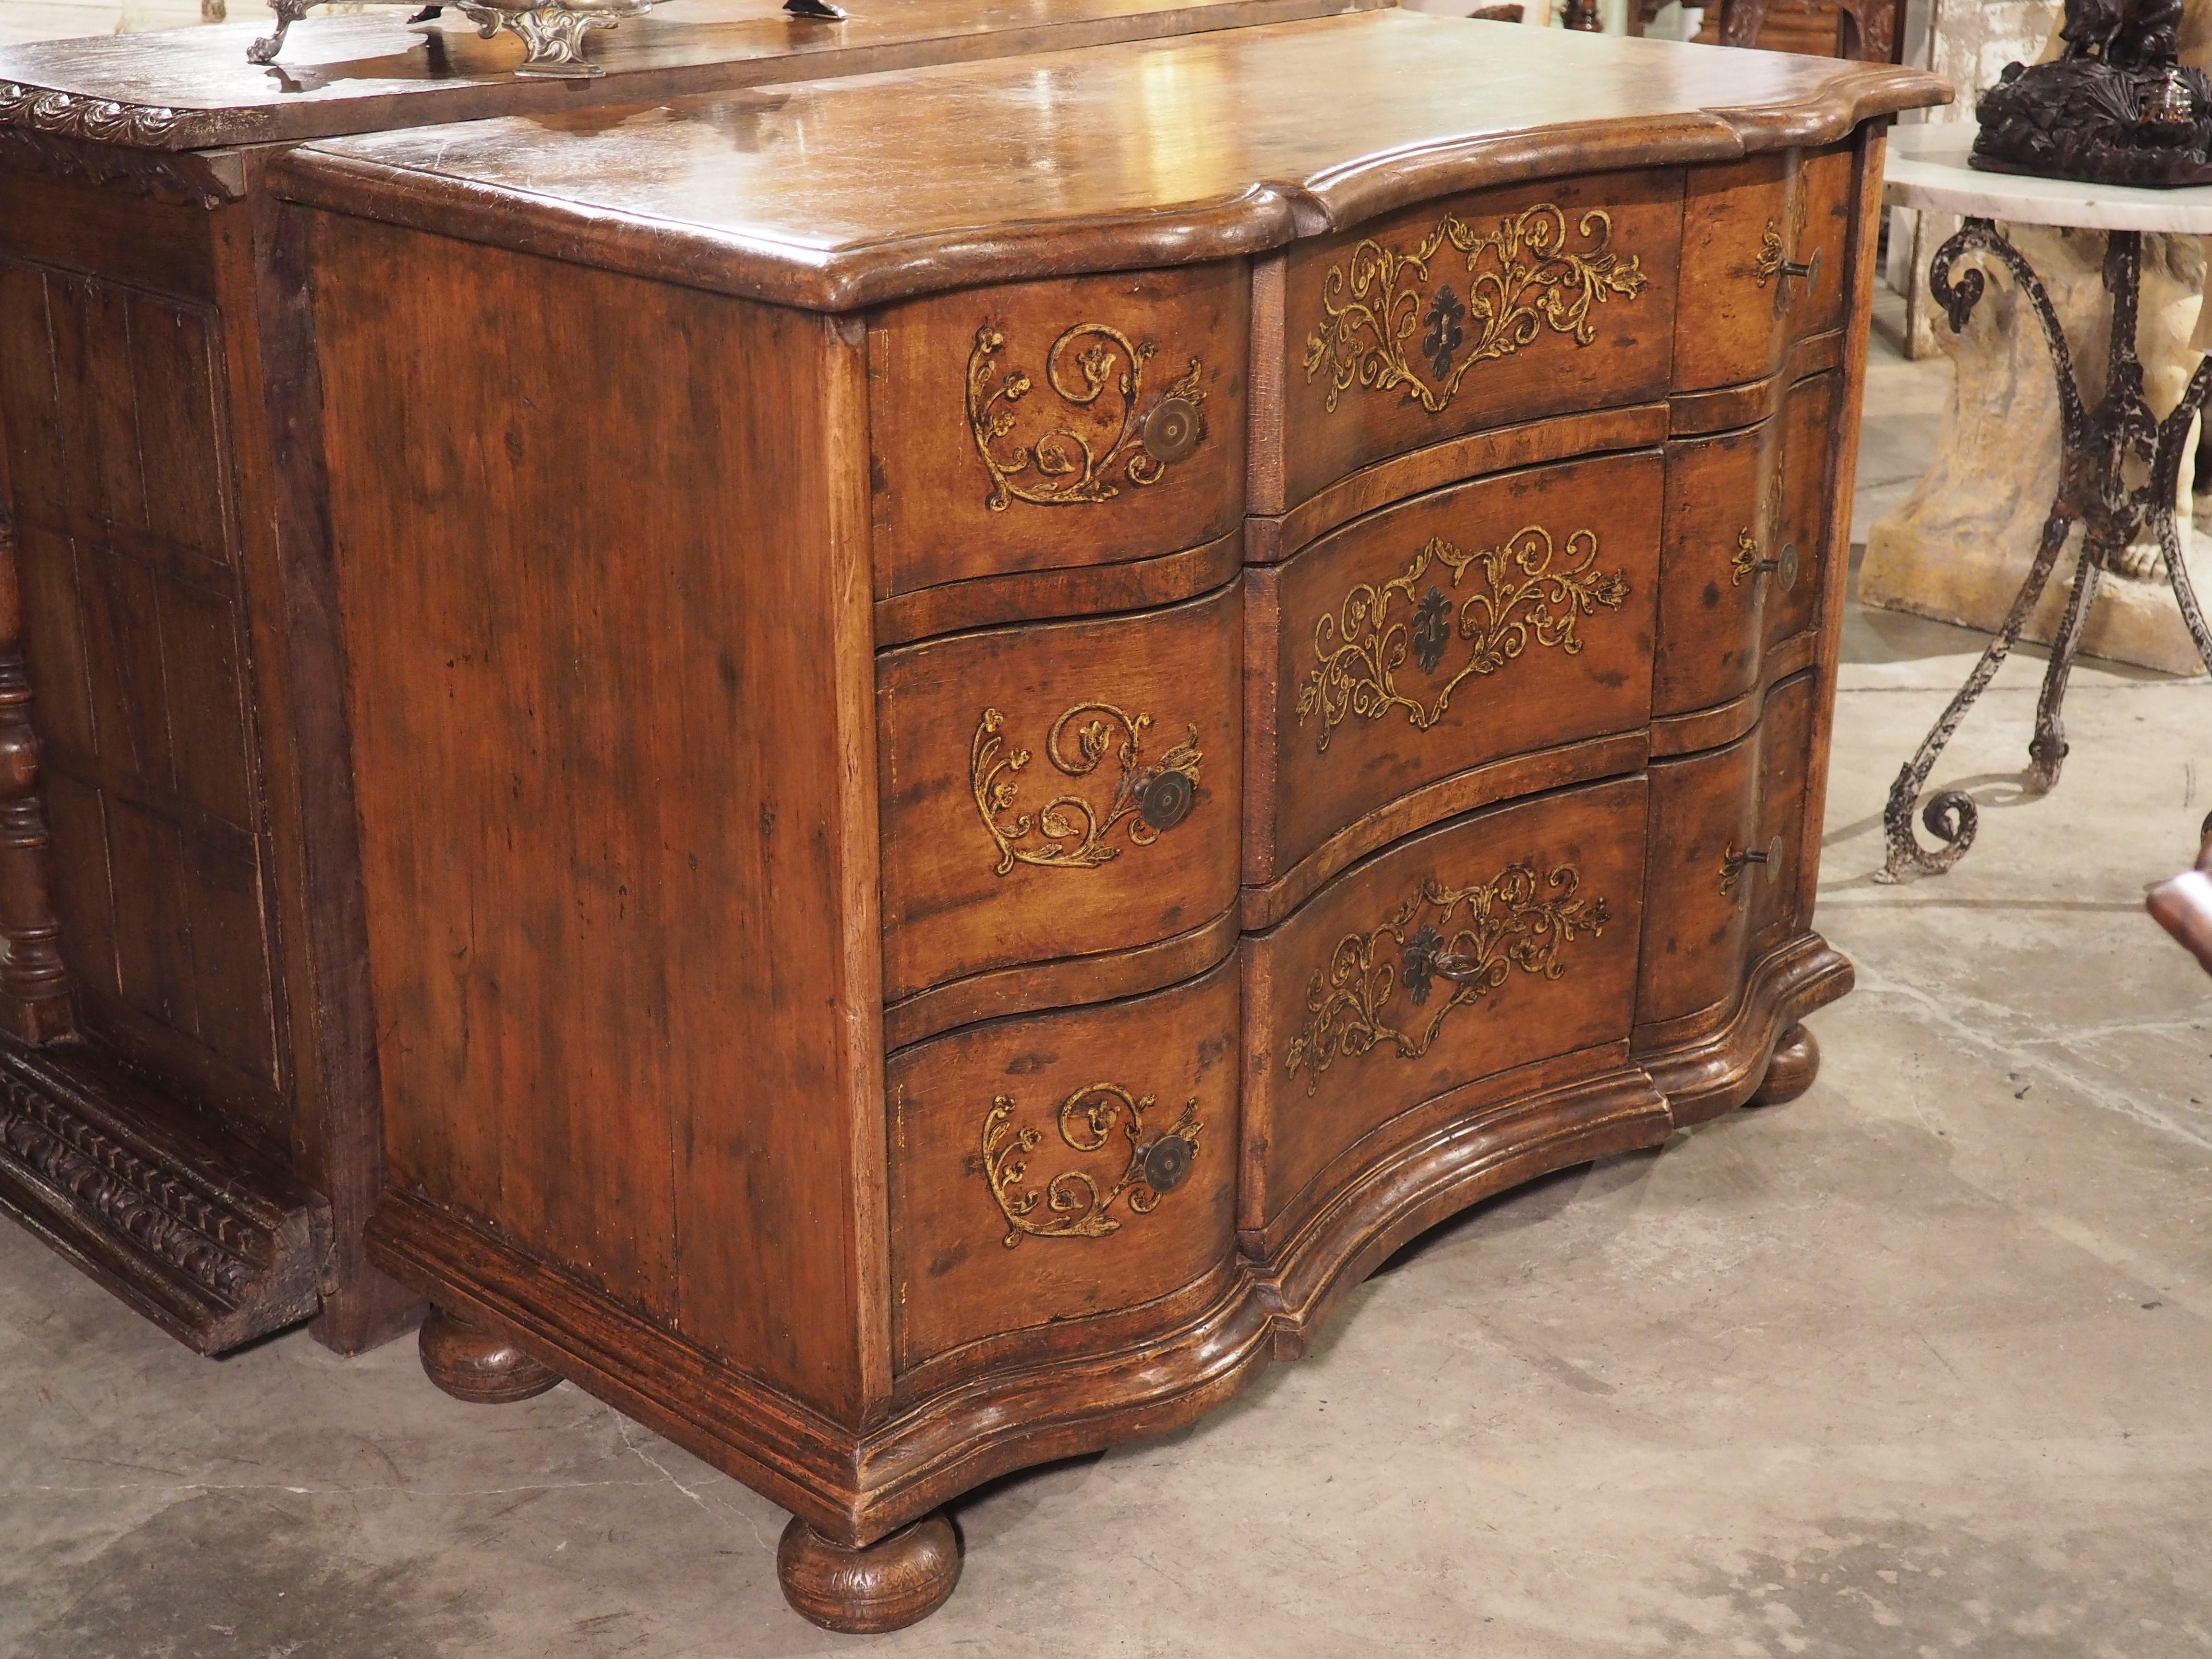 Hand-carved in Northern Italy during the 1800’s, this antique commode has lovely gilt painted drawer fronts. The hand-painted embellishments feature sprawling floral rinceaux and C-scrolls with a golden-brown hue. The airy and curvaceous nature of